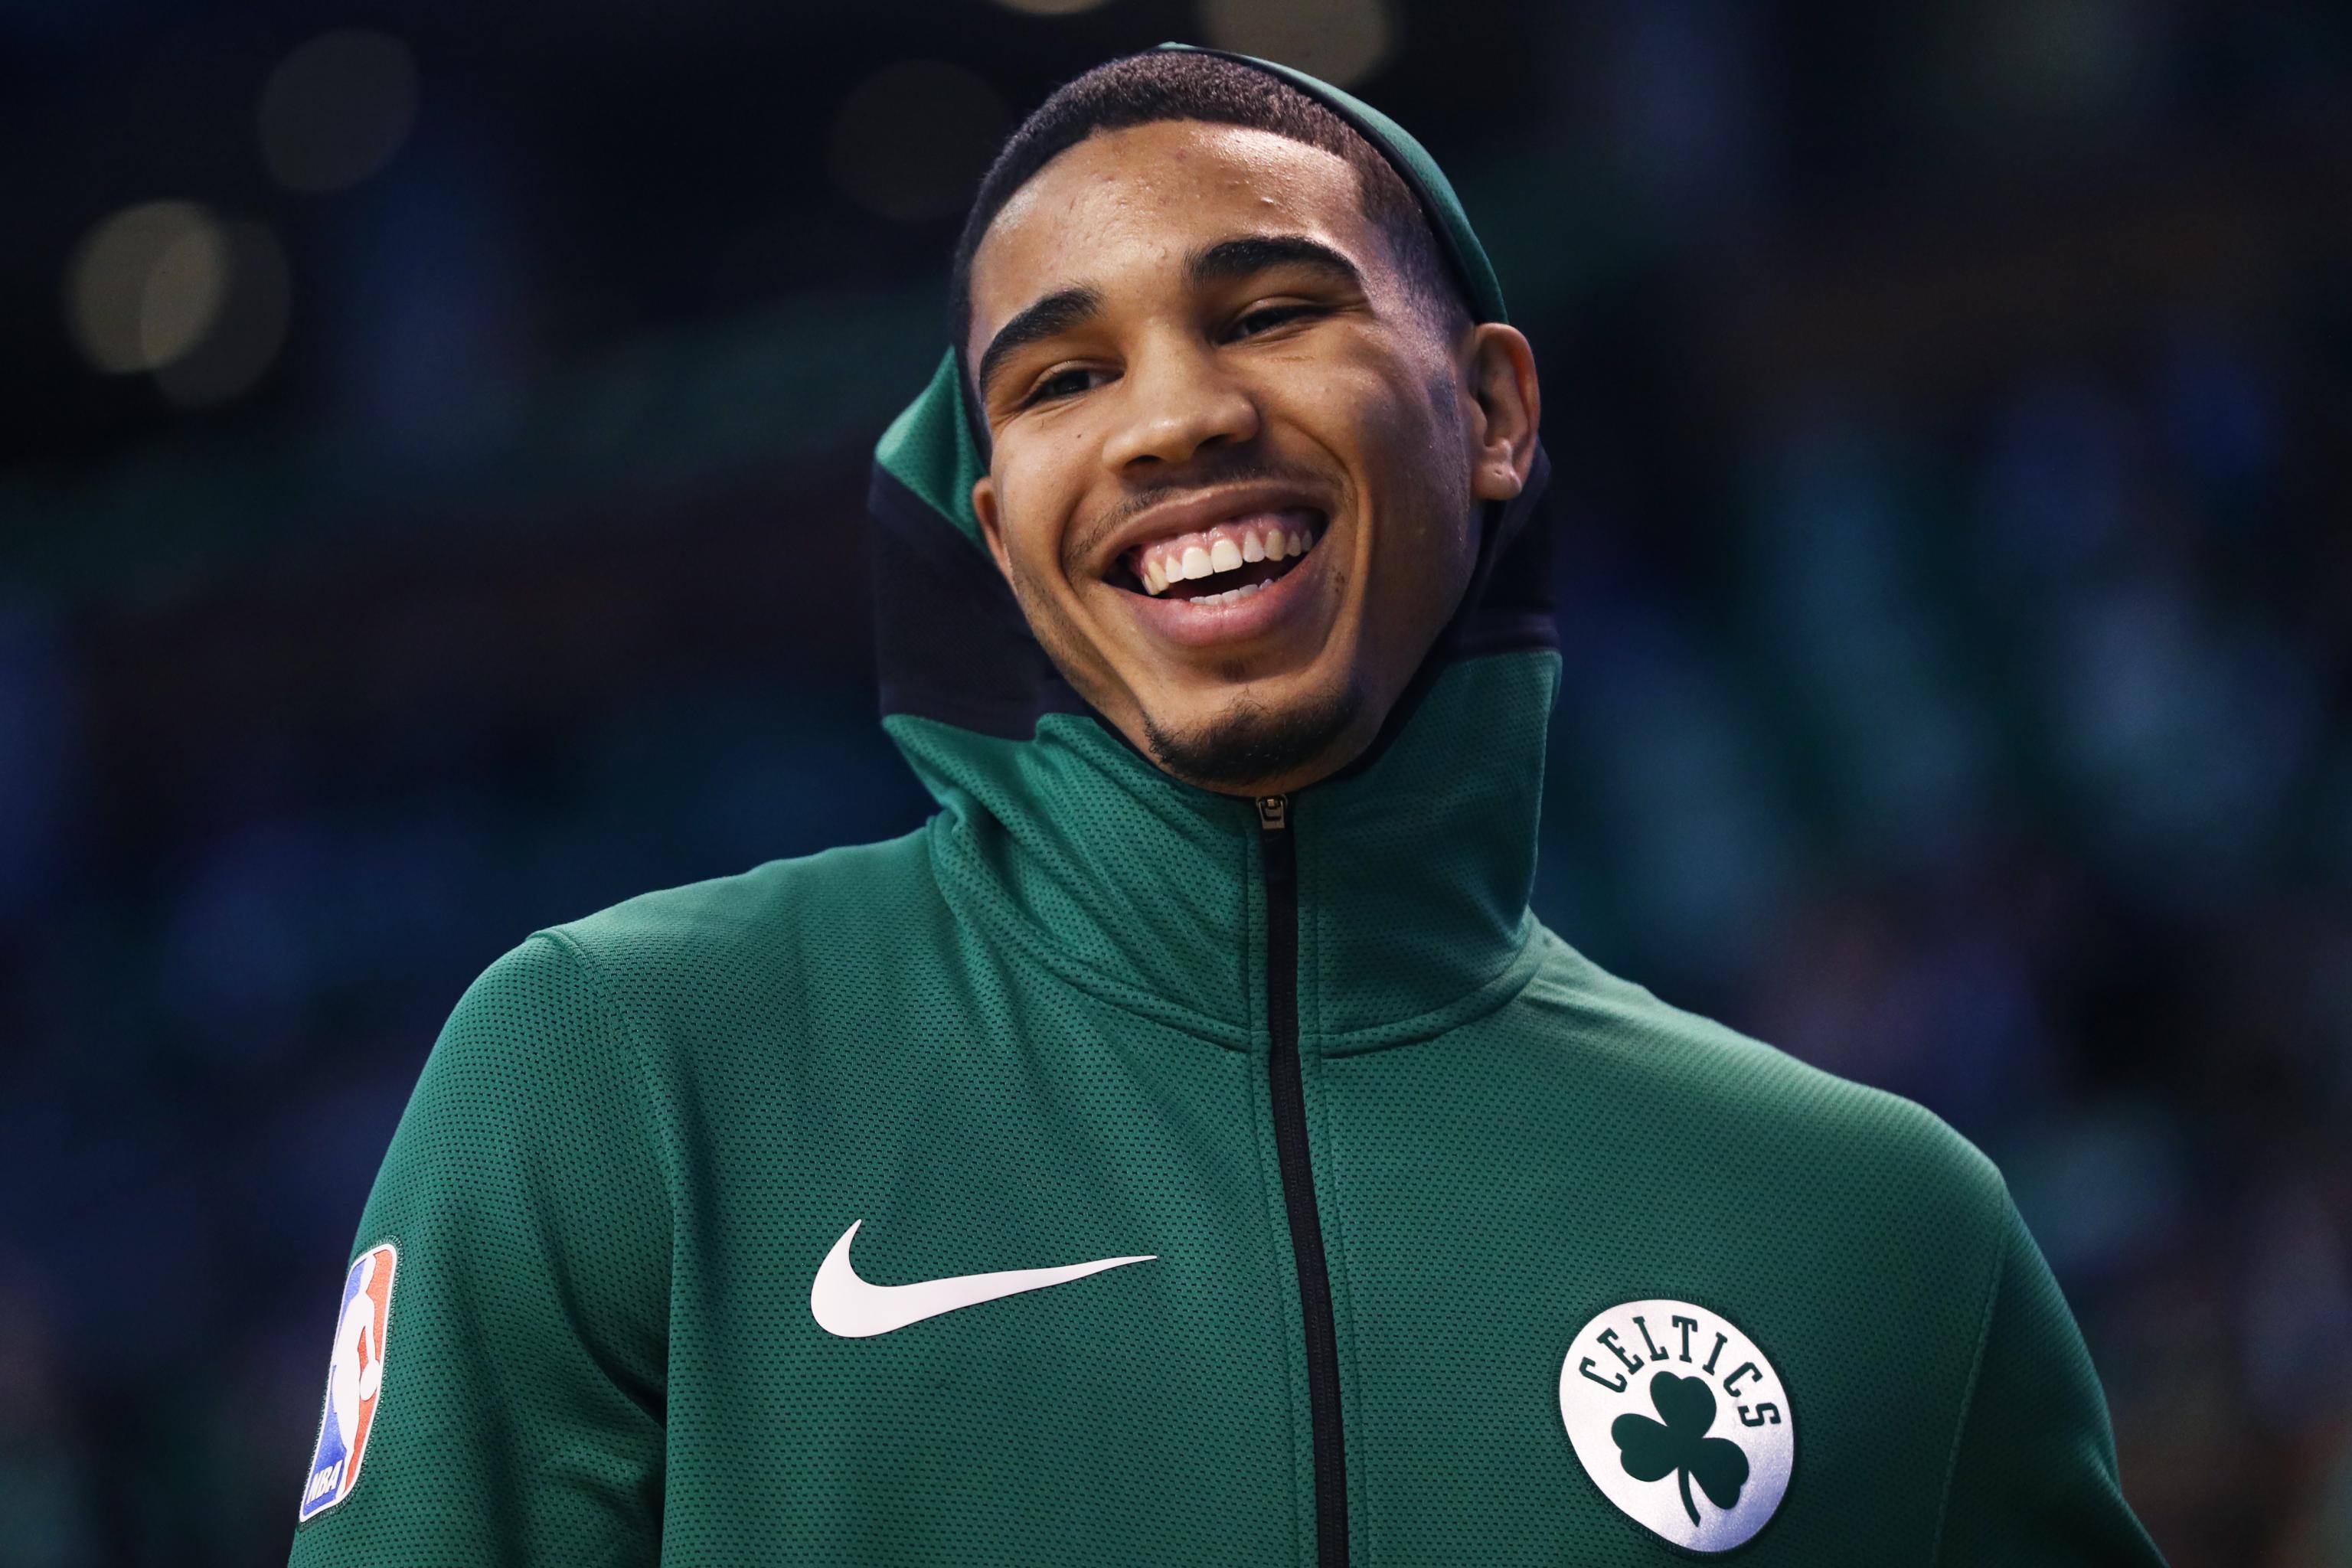 𝙃𝙀𝘼𝙏 𝙉𝘼𝙏𝙄𝙊𝙉 on X: Jayson Tatum is quite possibly the